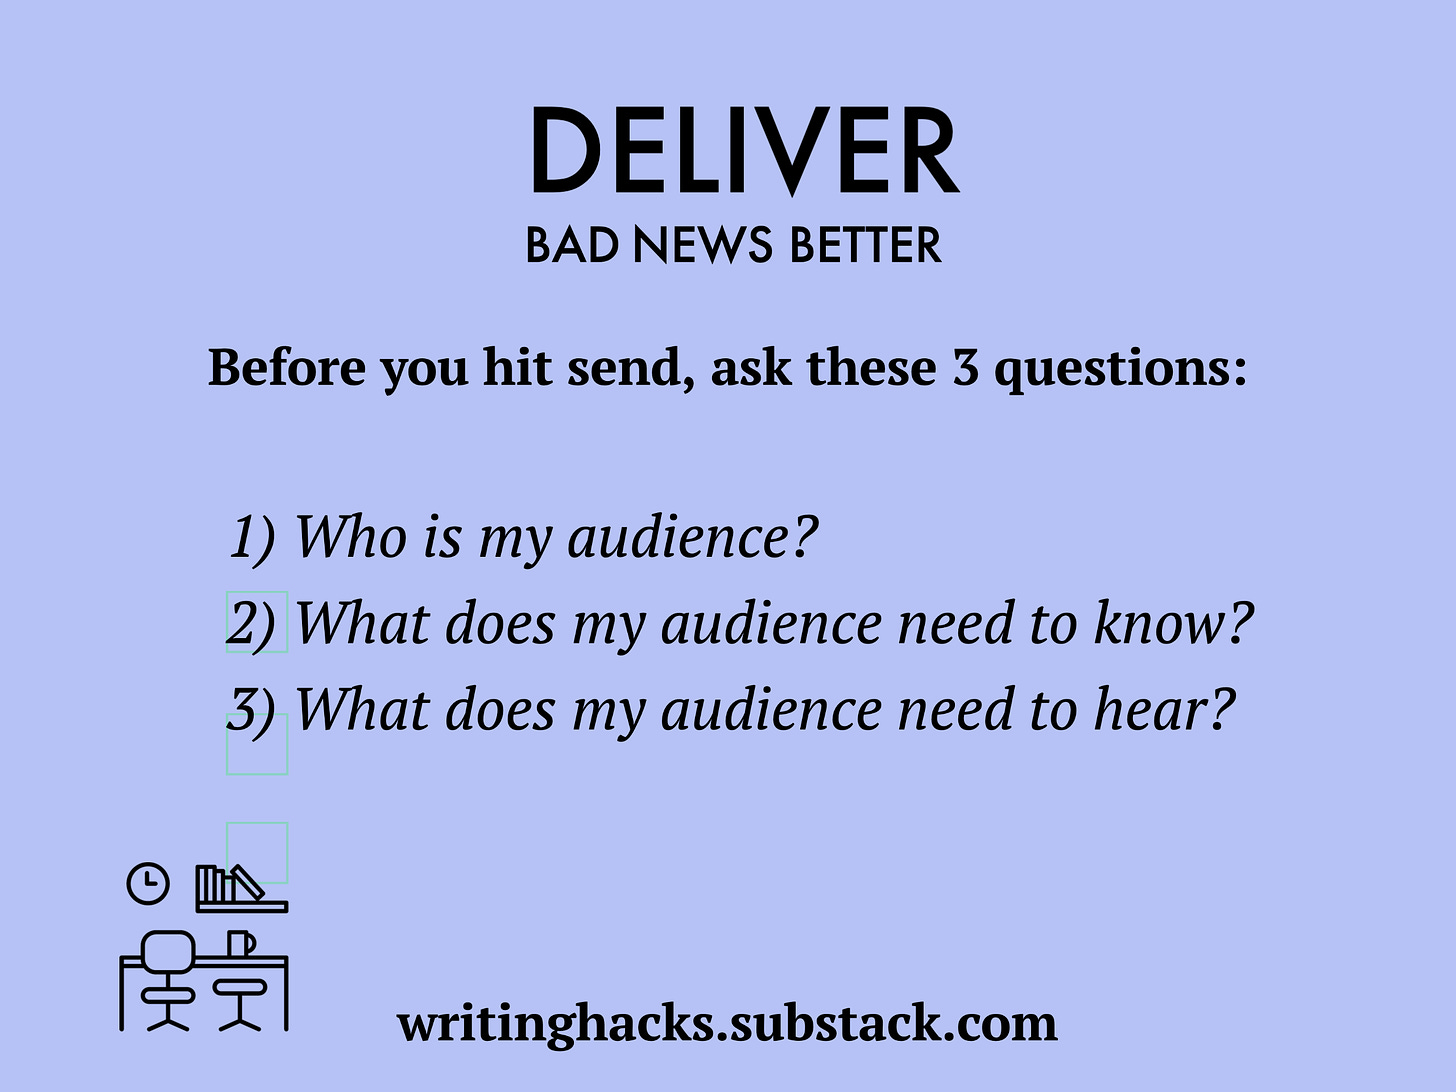 To deliver bad news better, ask: who is my audience? what does my audience need to know? what does my audience need to hear? click on image to go to full text version